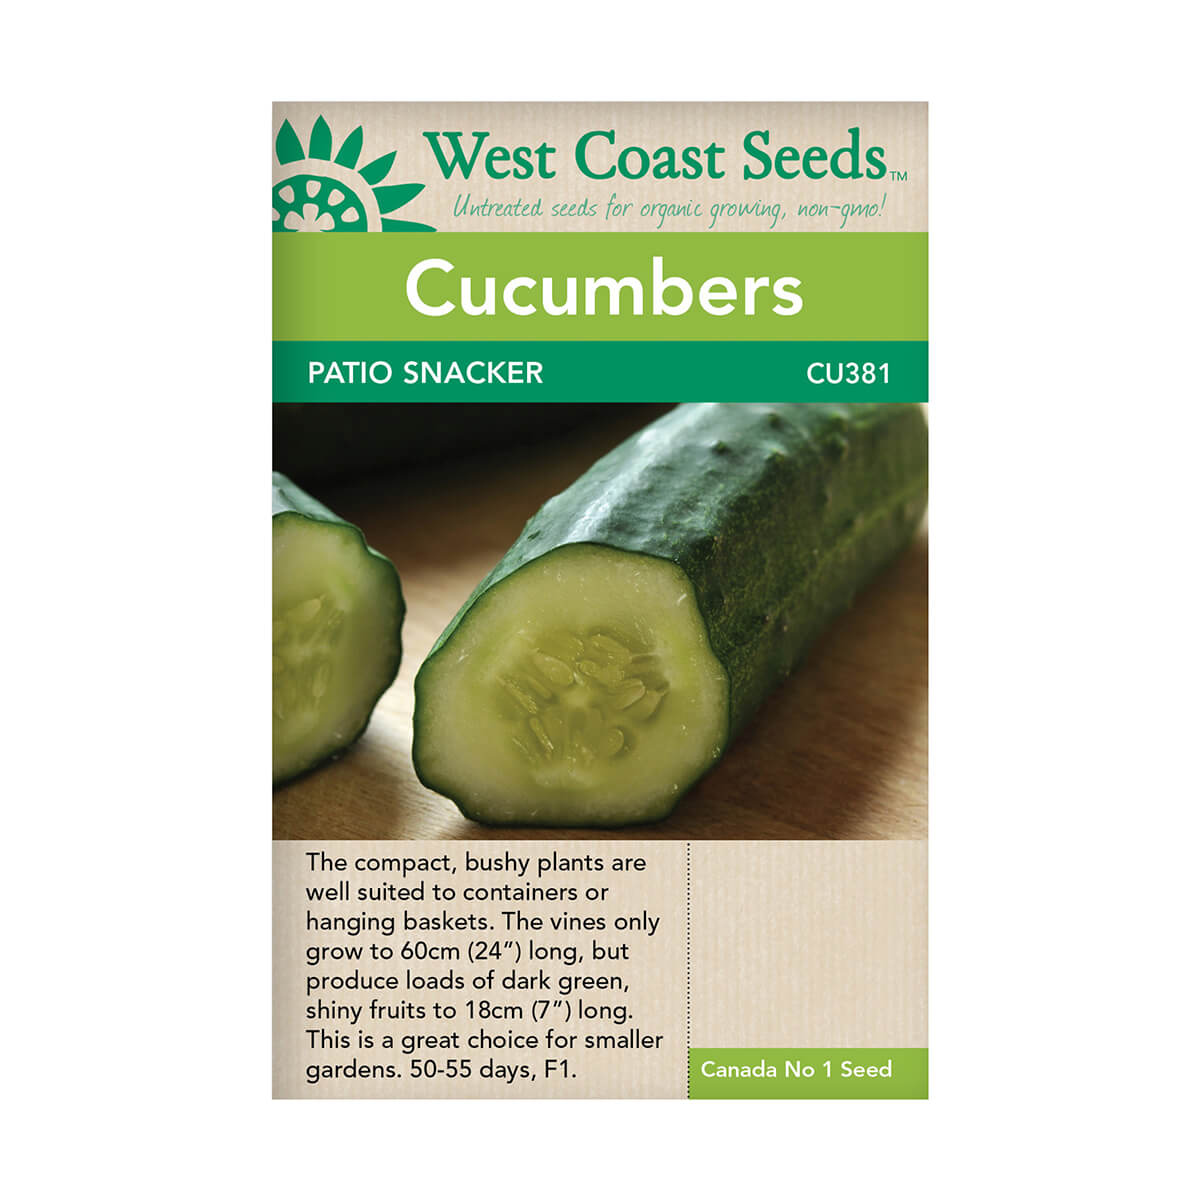 Patio Snacker Cucumber Seeds - approx. 10 seeds